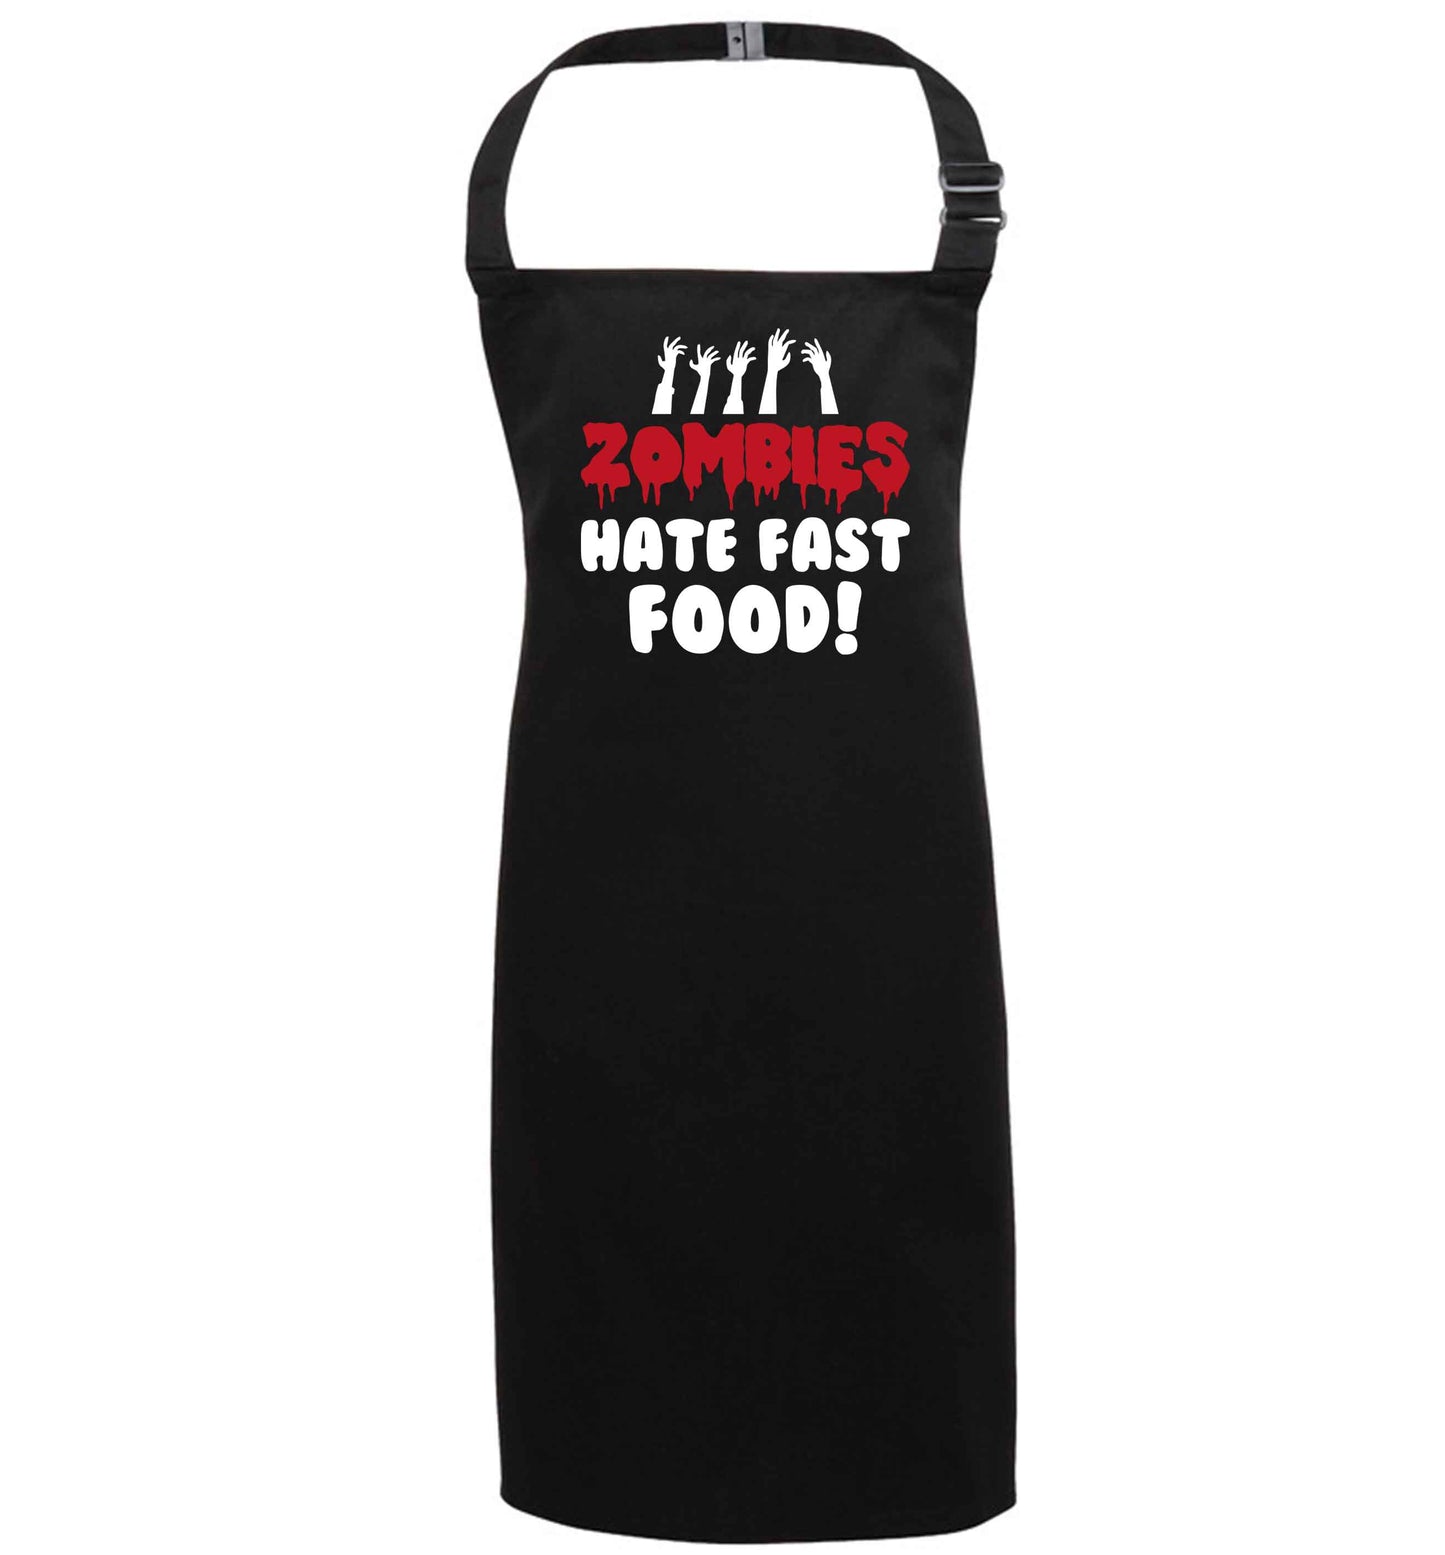 Zombies hate fast food black apron 7-10 years